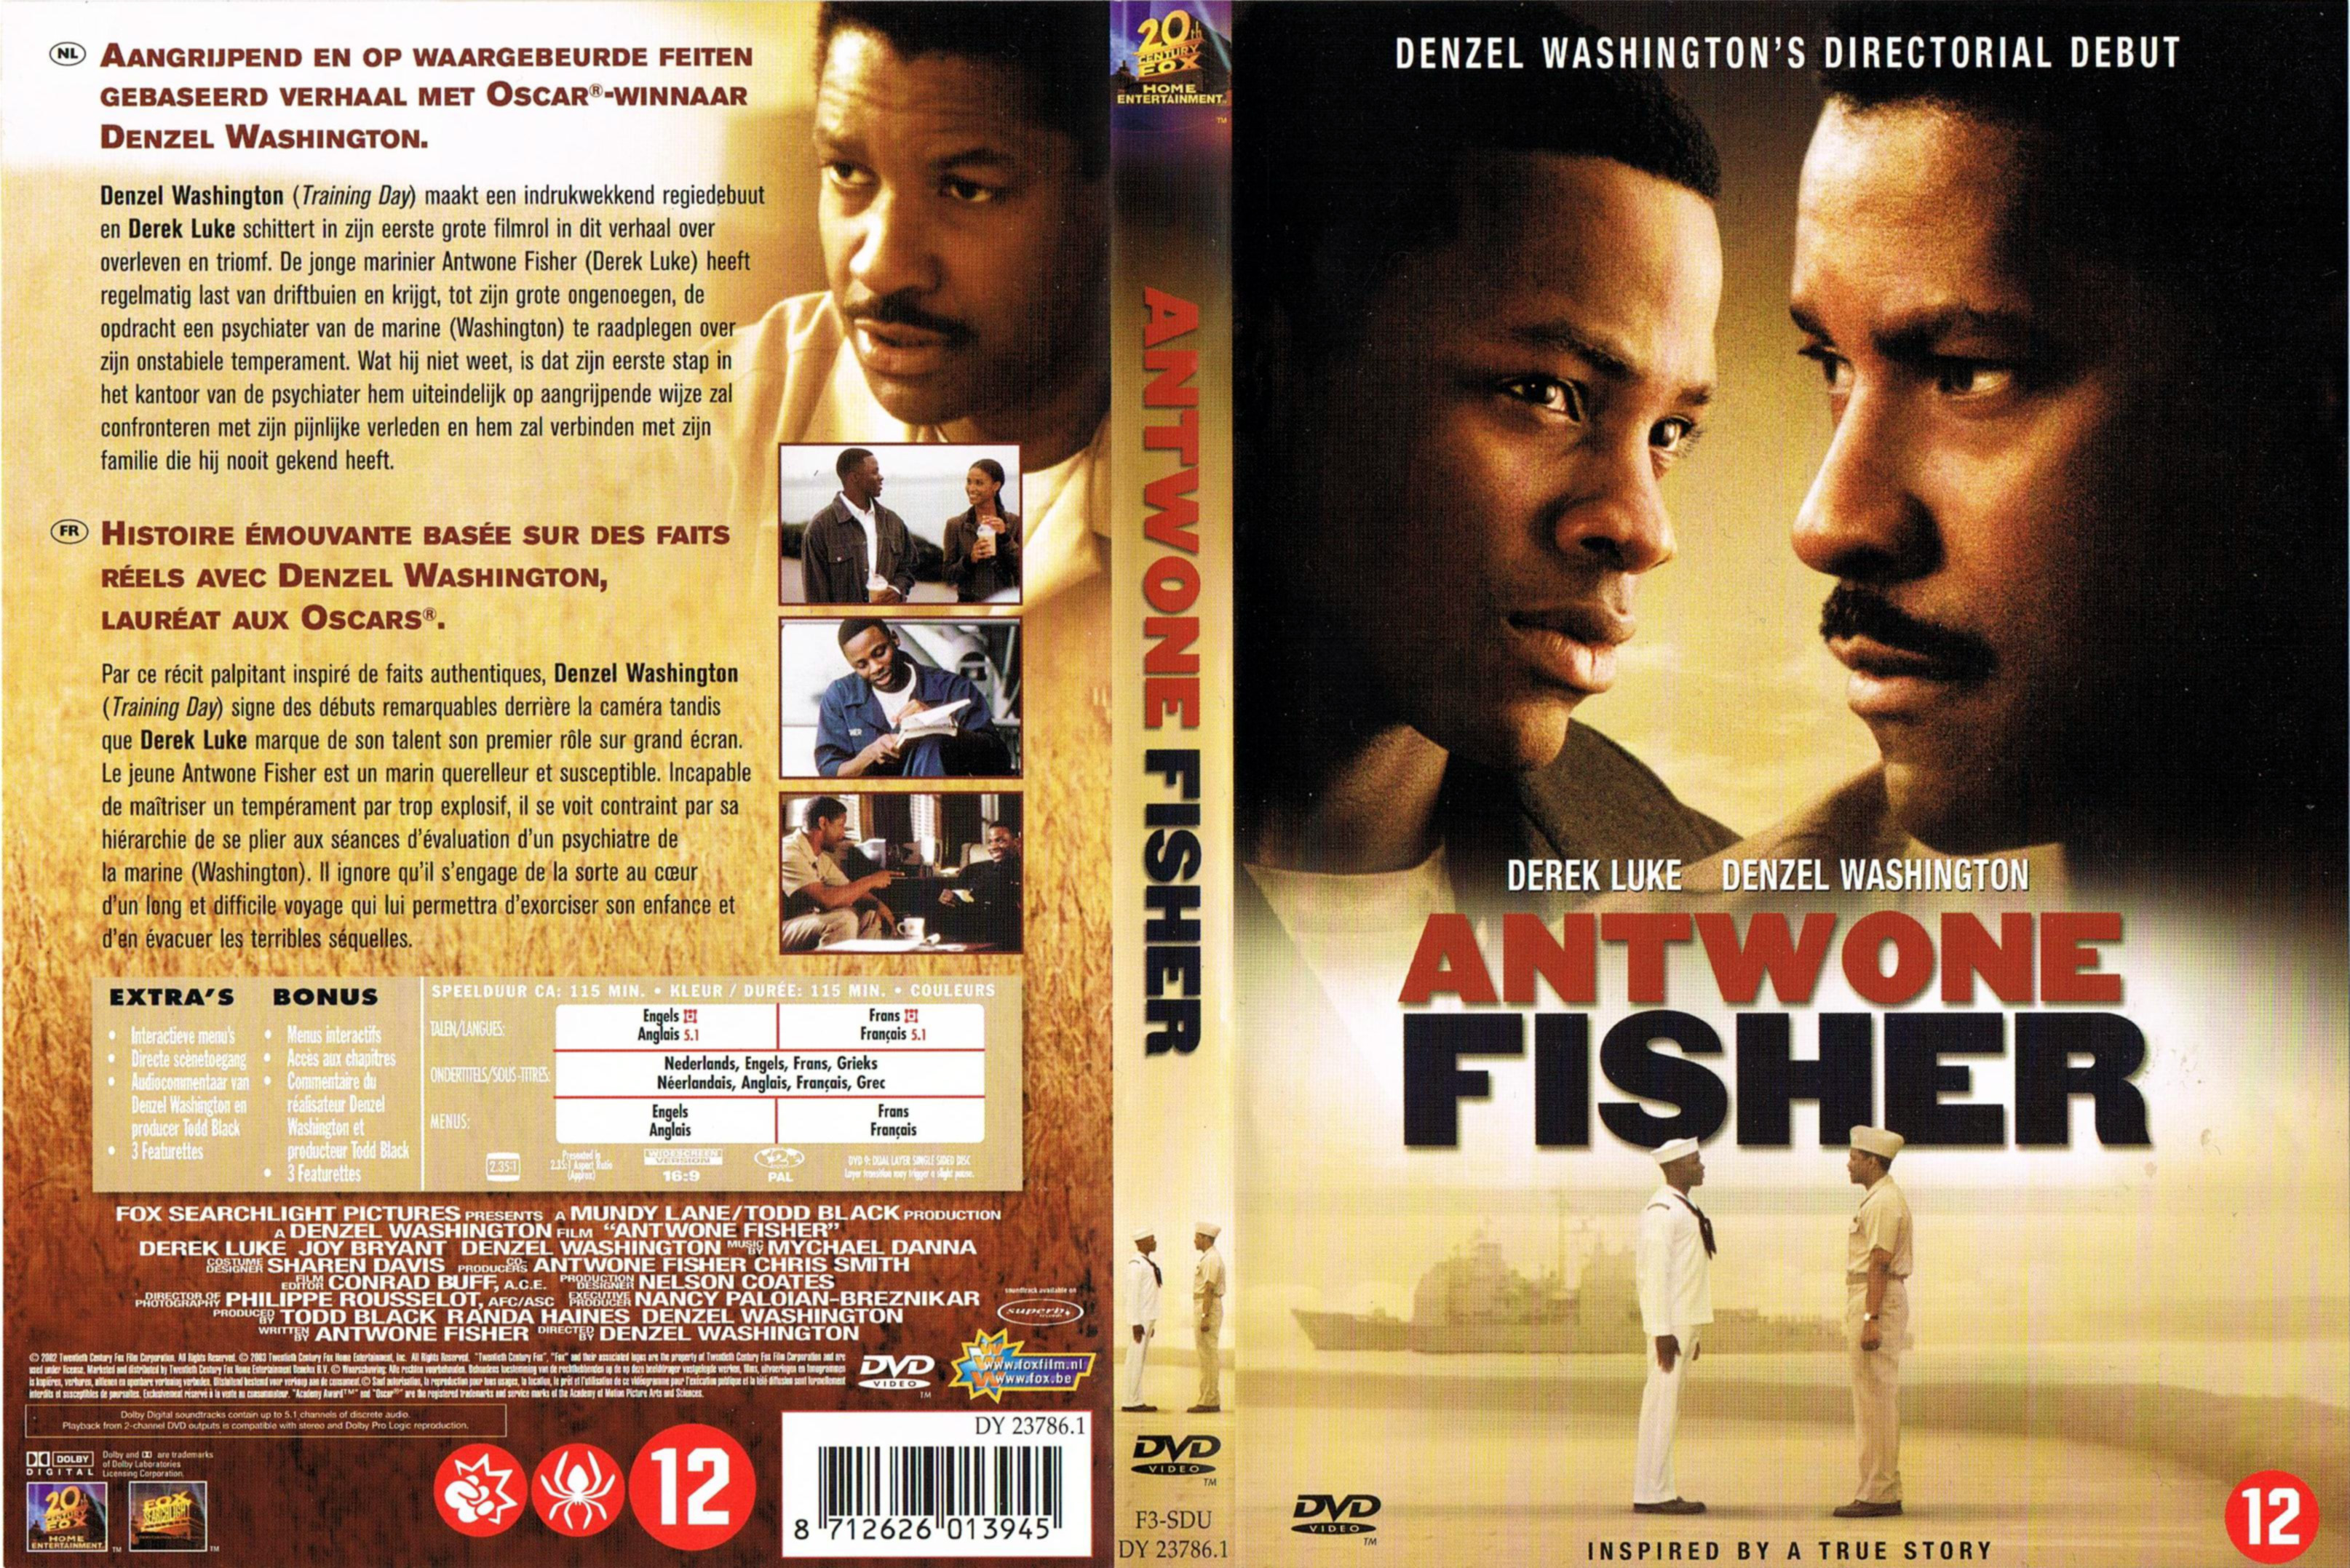 Jaquette DVD Antwone Fisher v2